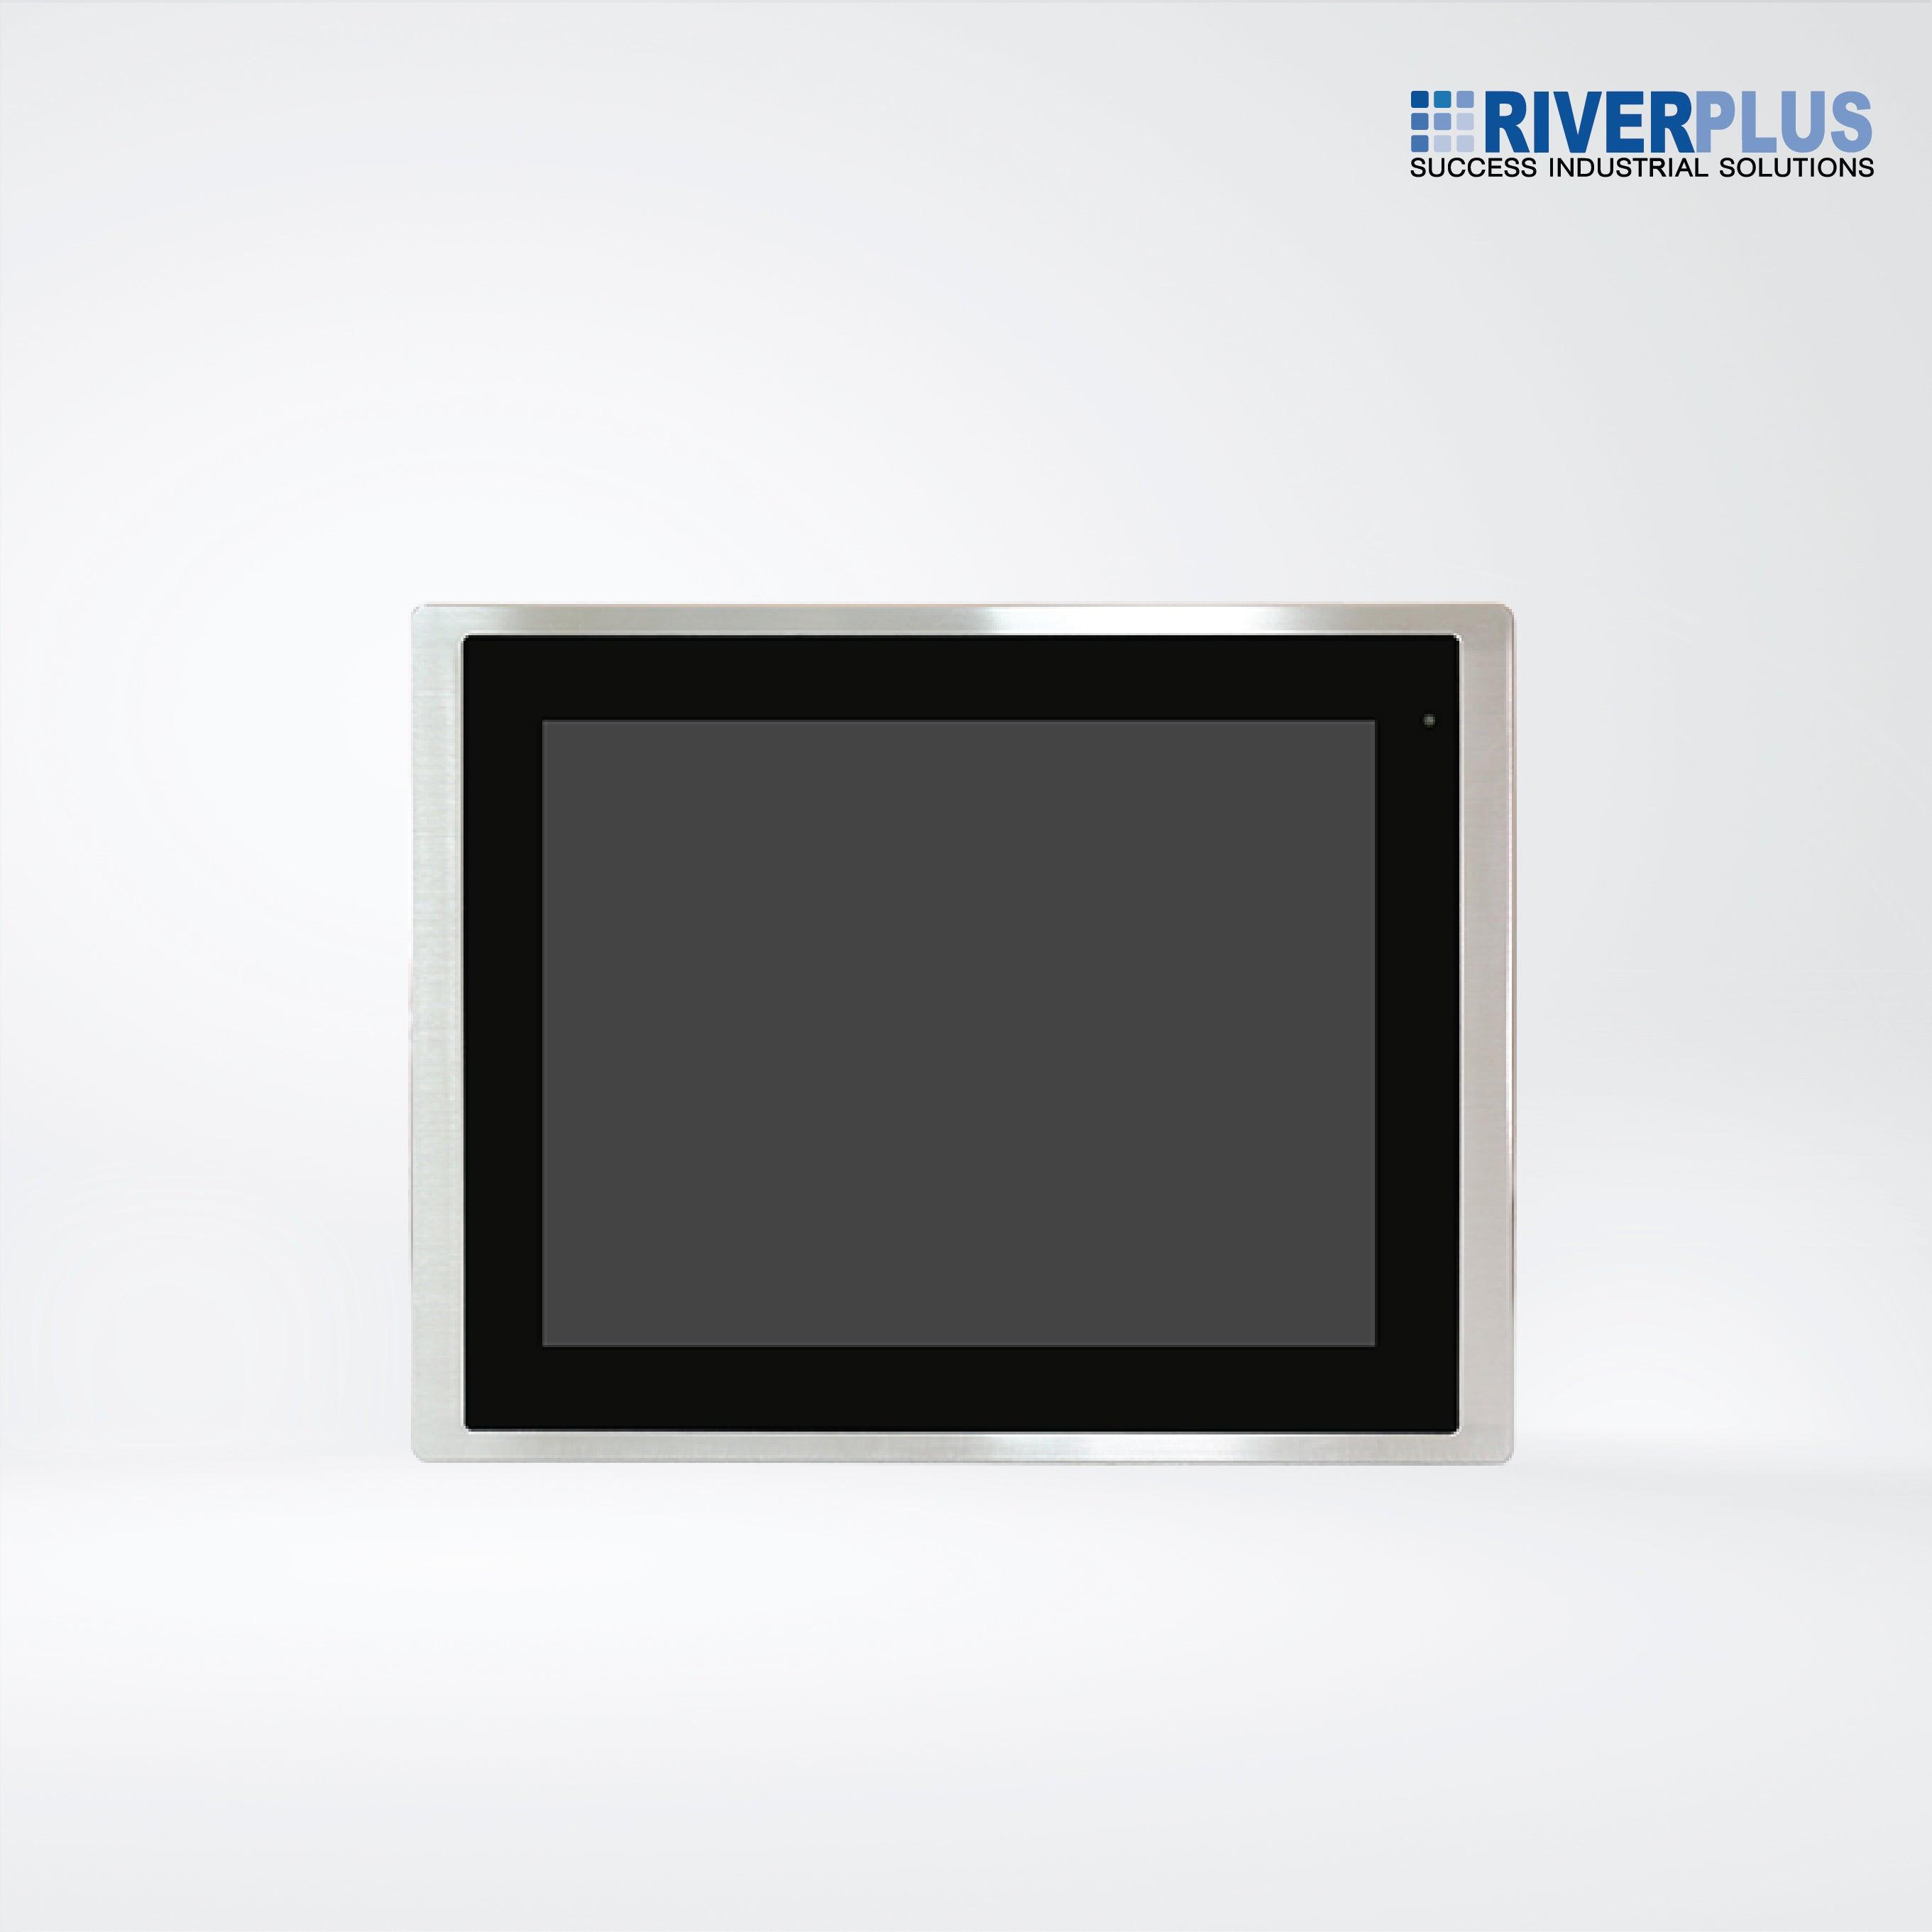 FABS-112GH 12.1” Flat Front Panel IP66 Stainless Chassis Display - Riverplus